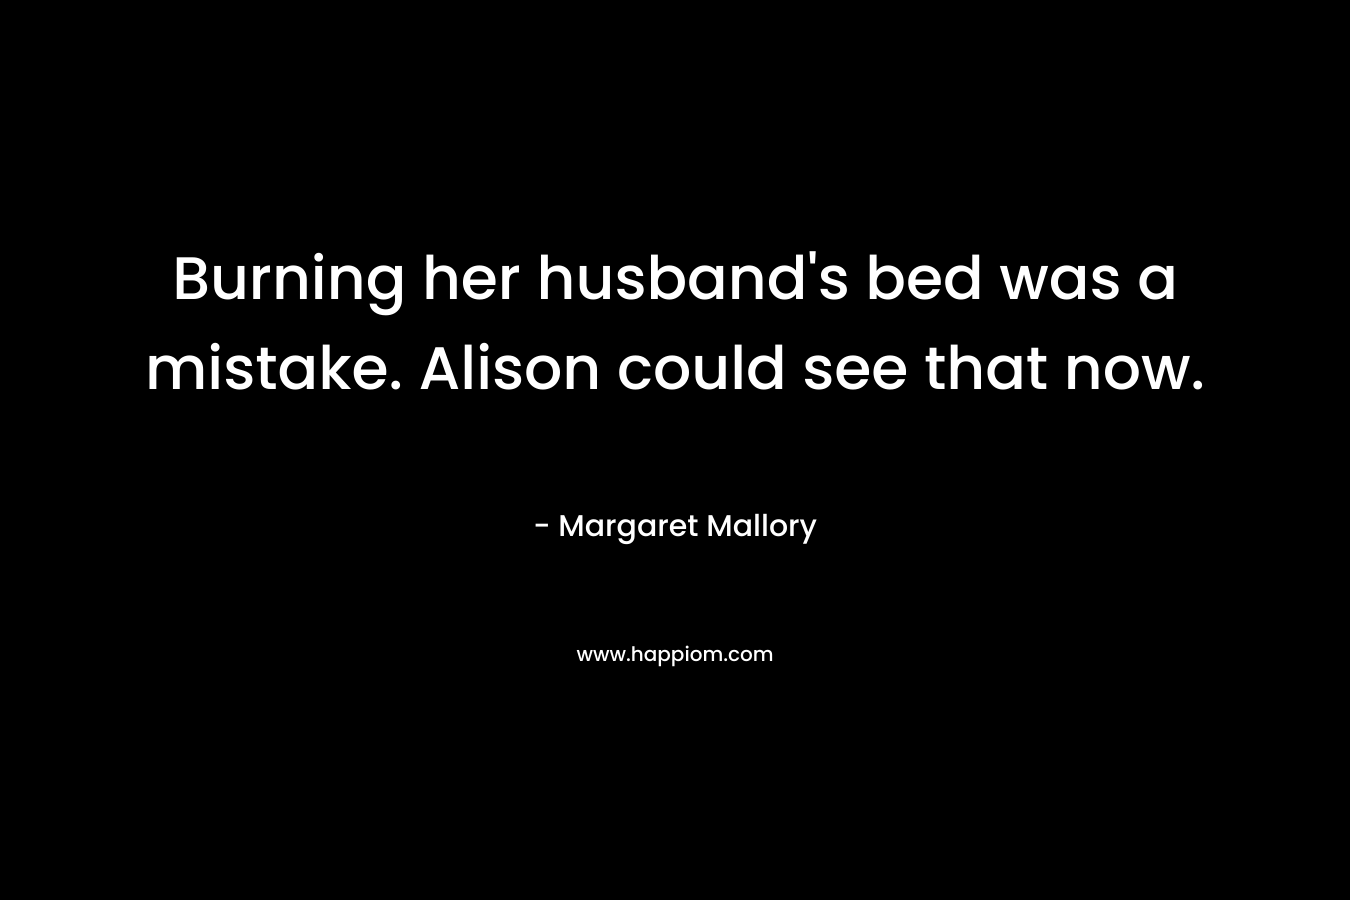 Burning her husband's bed was a mistake. Alison could see that now.